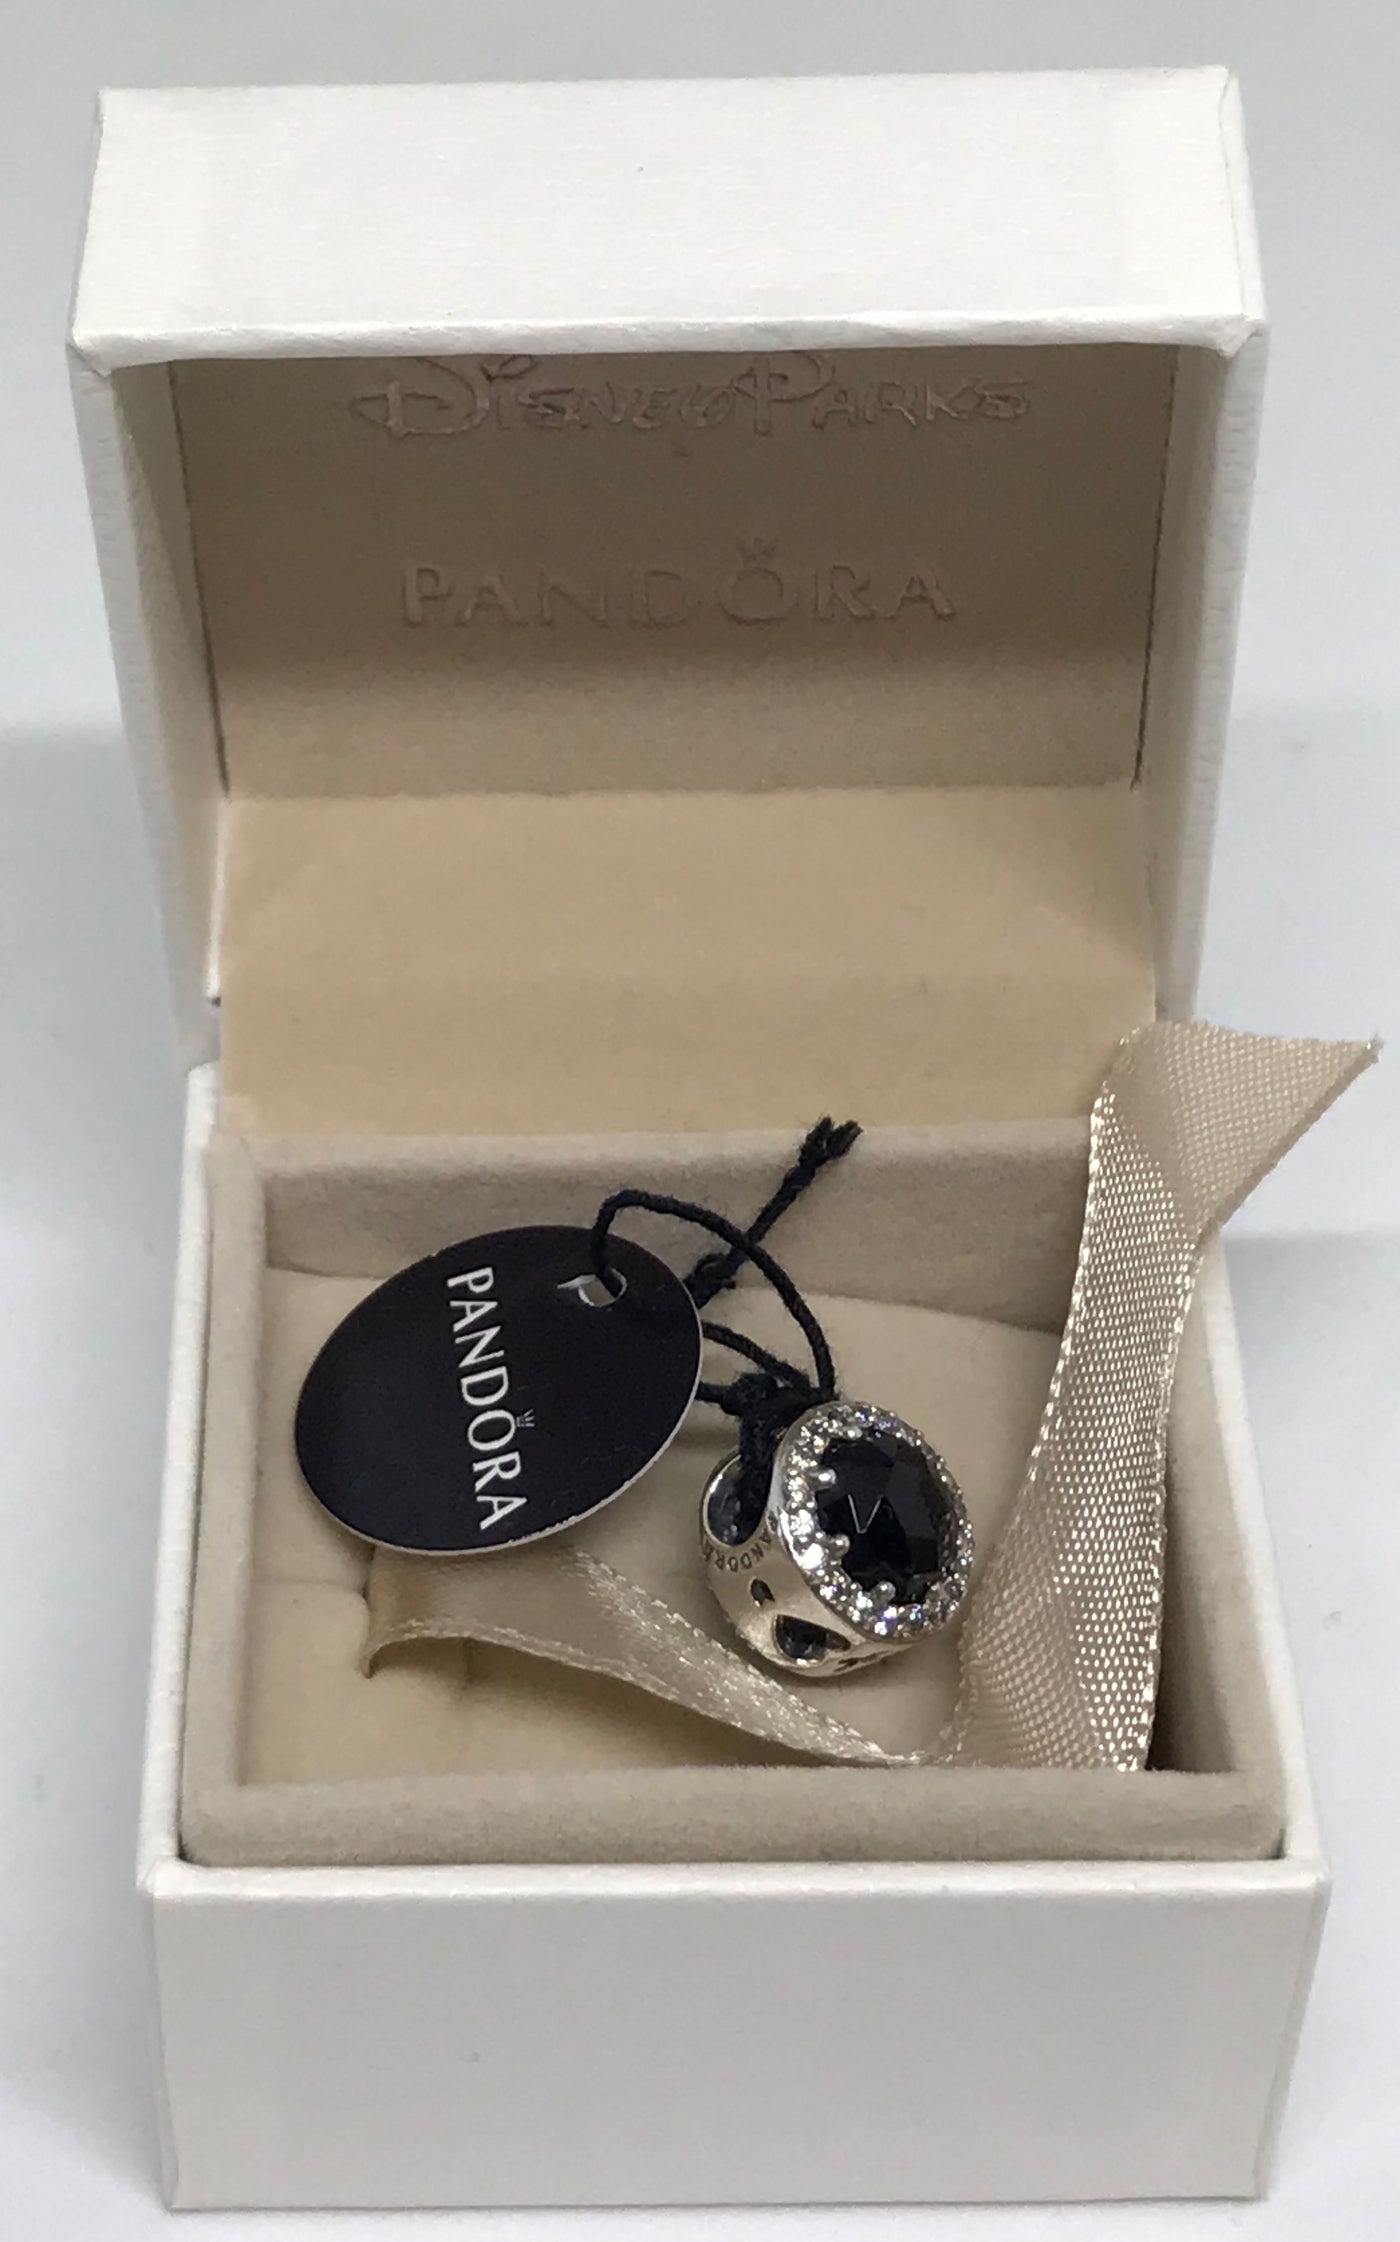 Disney Parks Evil Queen Black Magic Charm by Pandora Jewelry New with Box